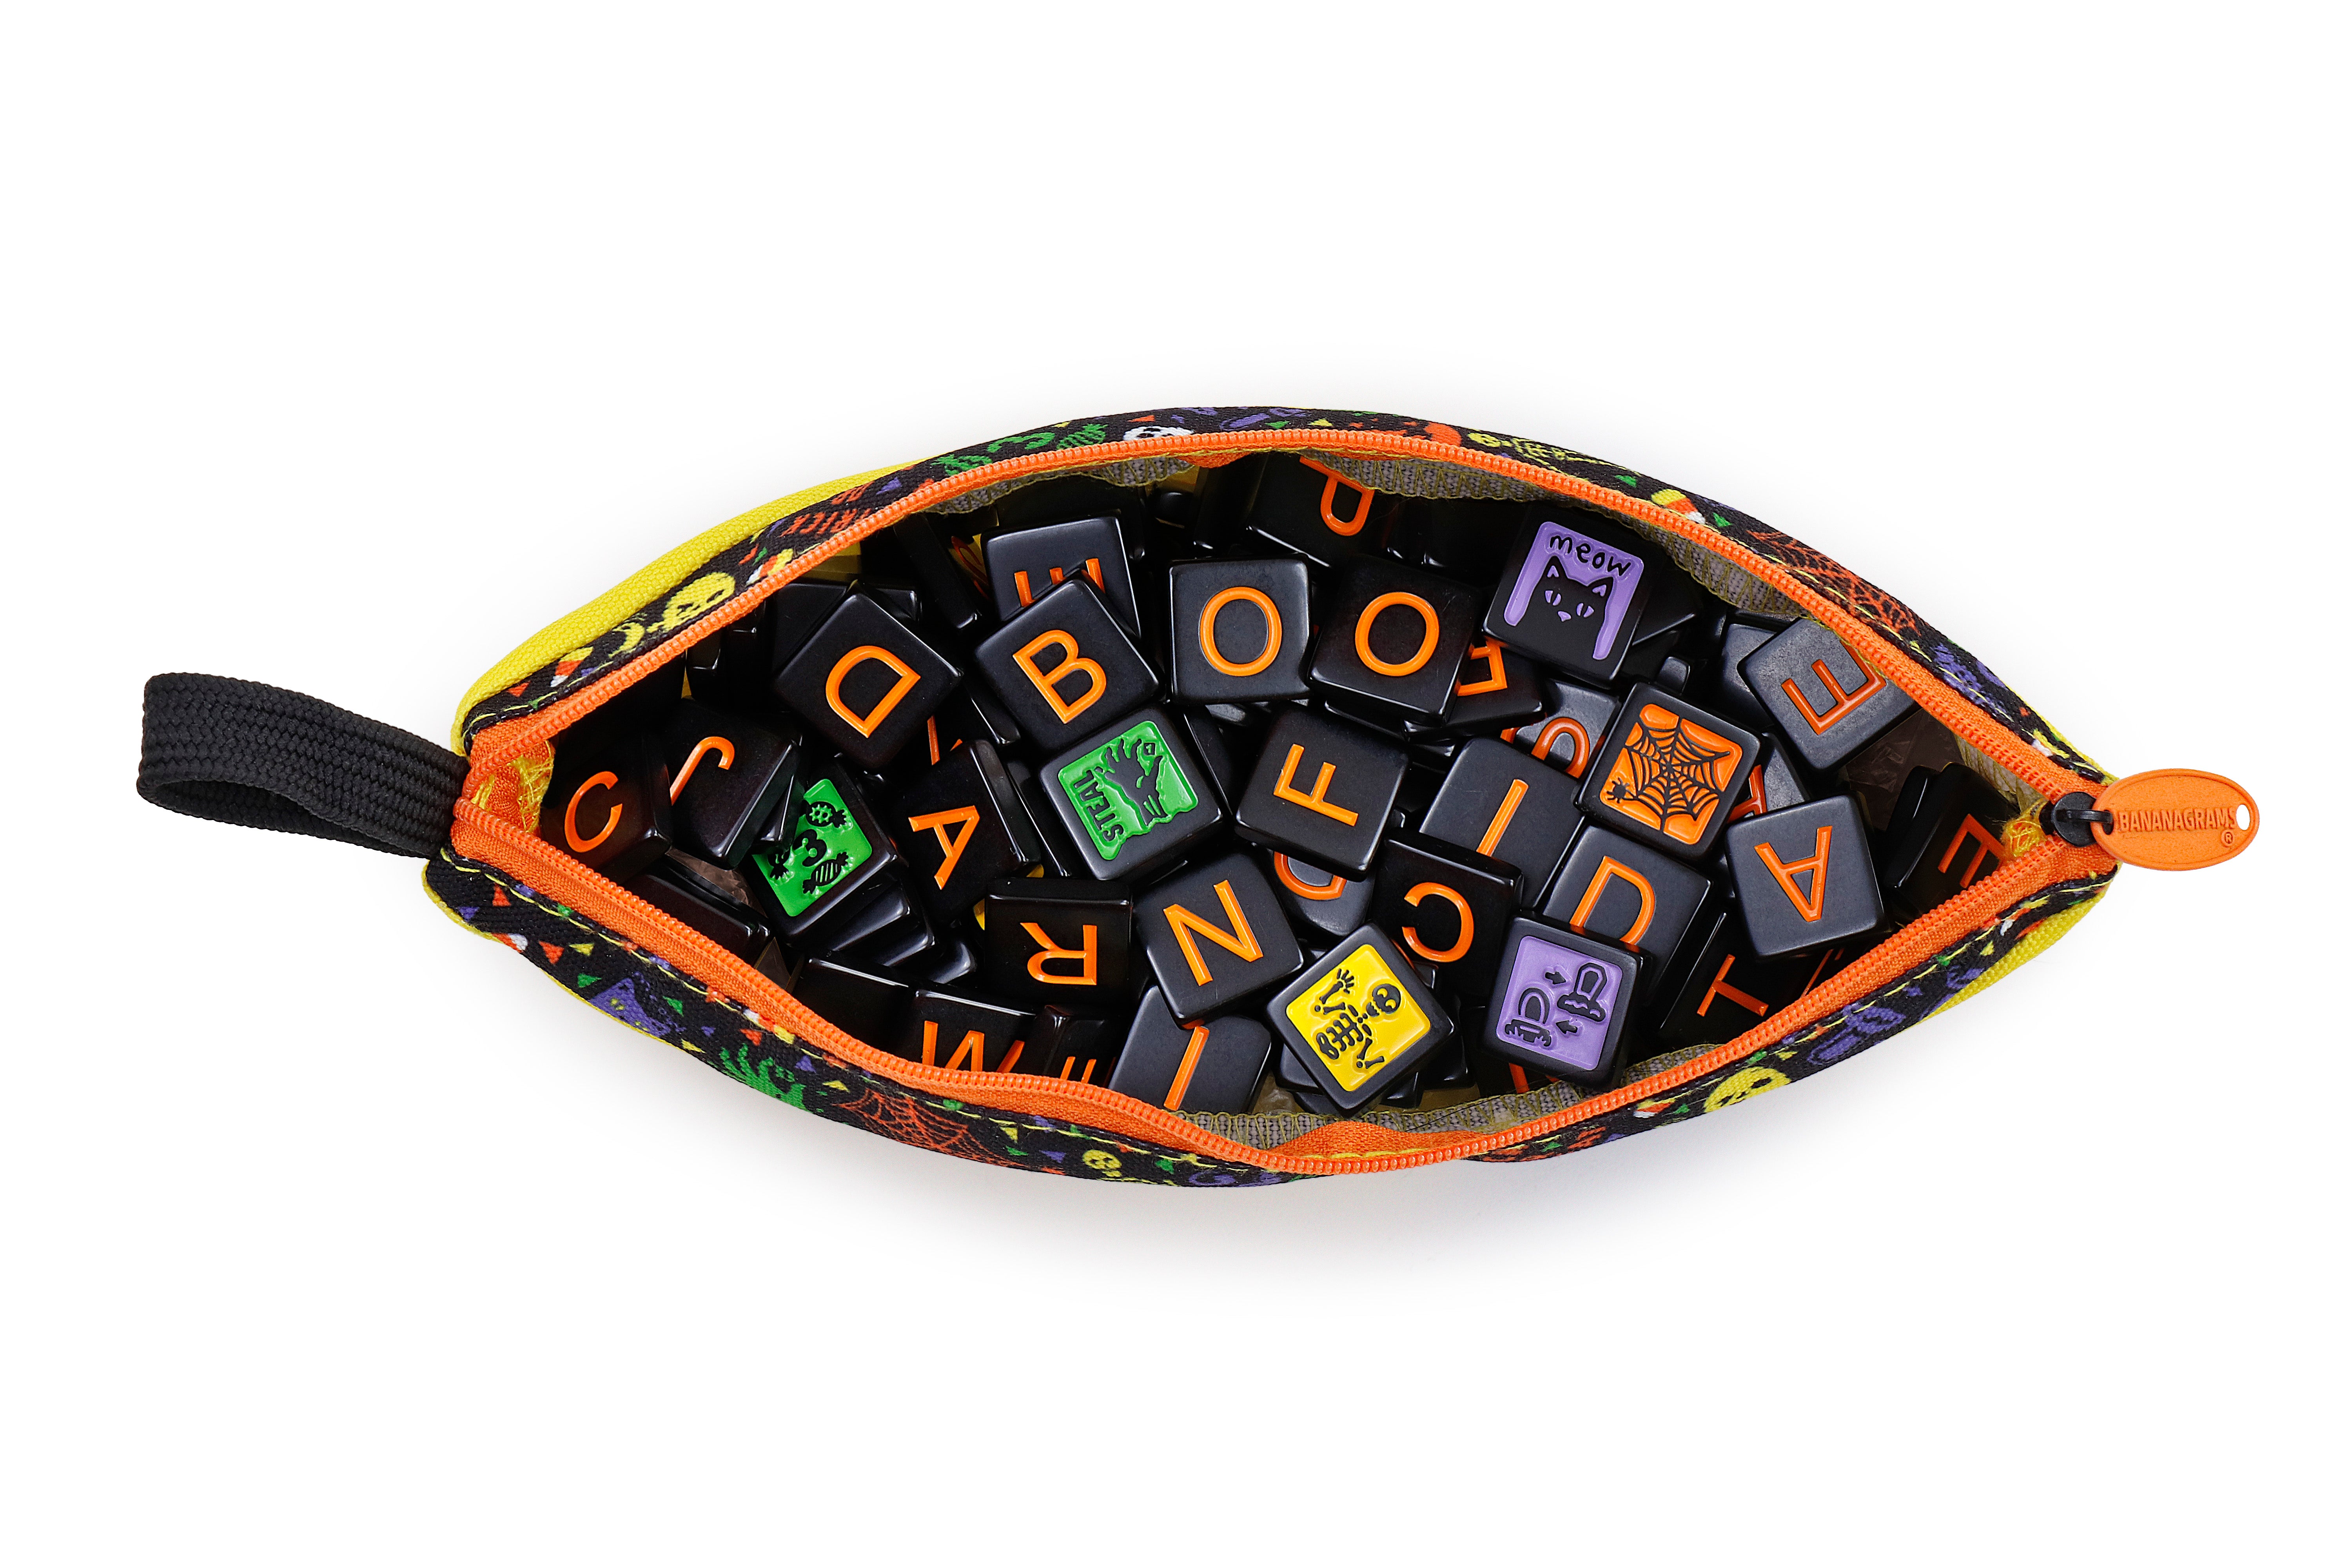 New Arrival! Bananagrams Halloween Party